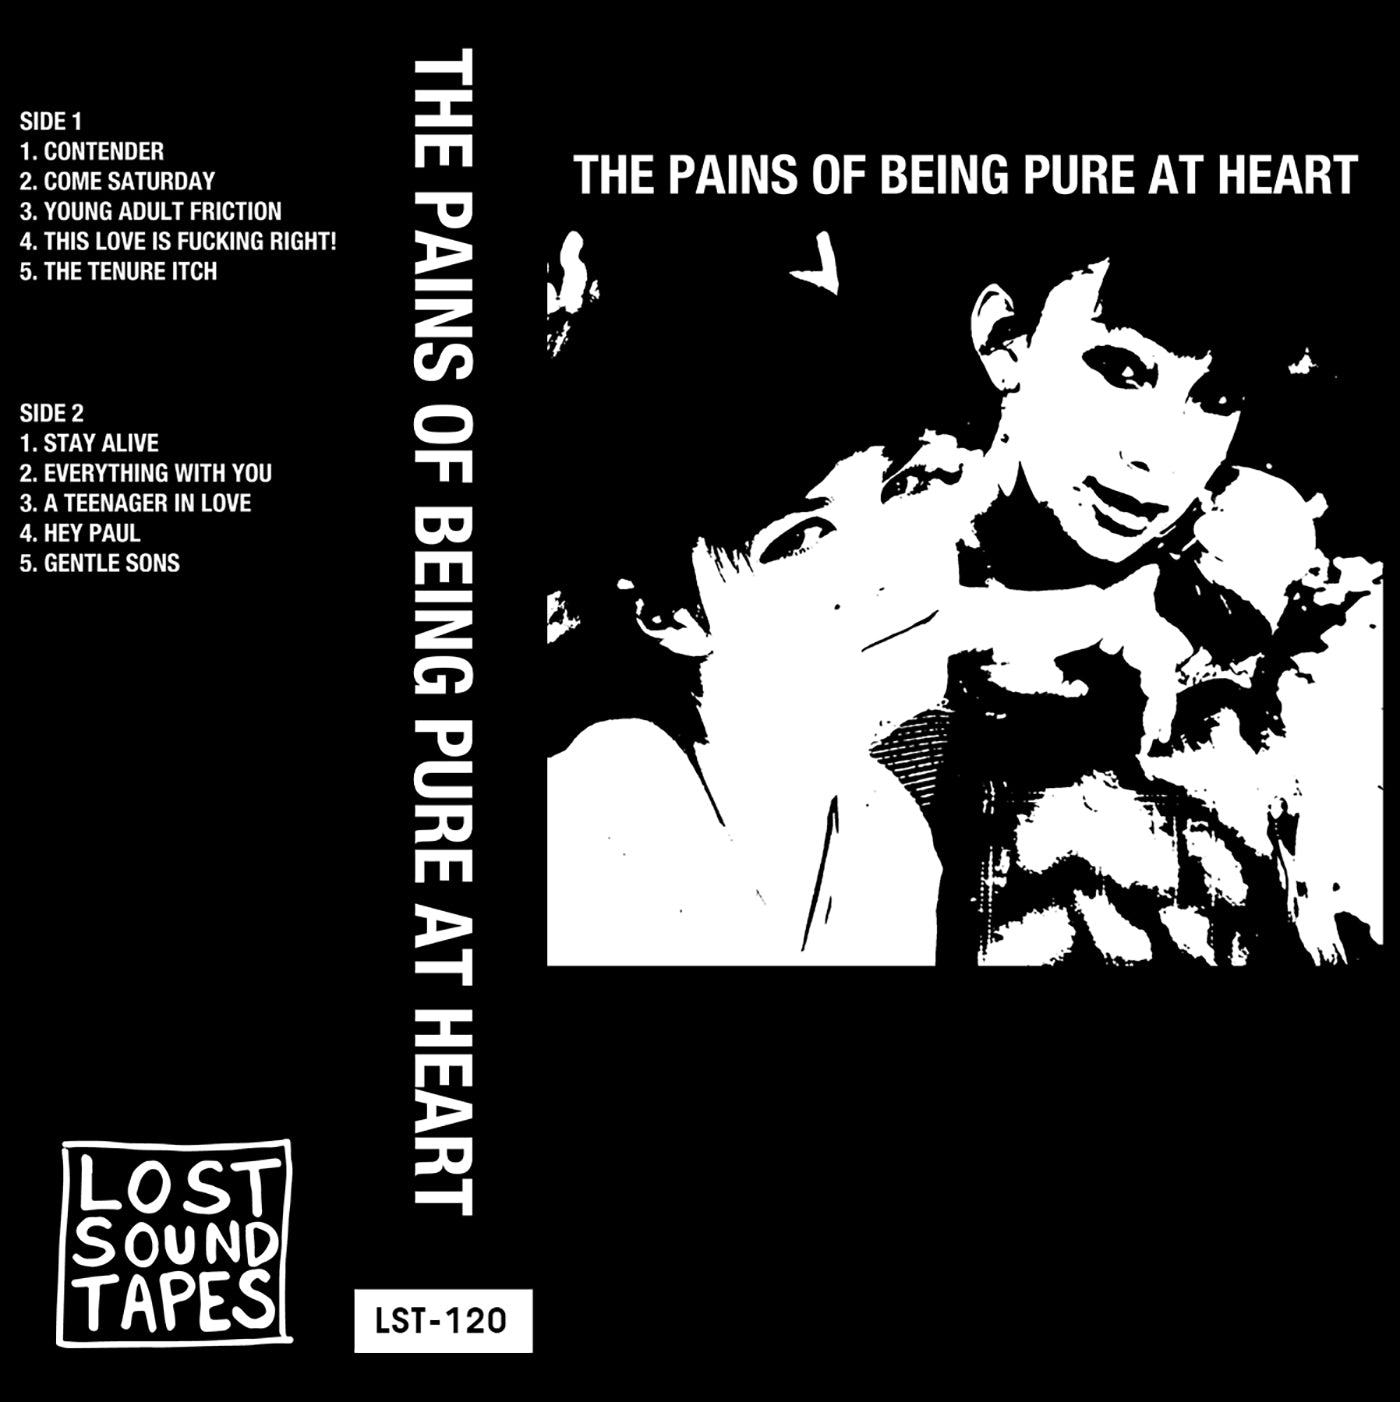 THE PAINS OF BEING PURE AT HEART "The Pains of Being Pure At Heart" cassette tape